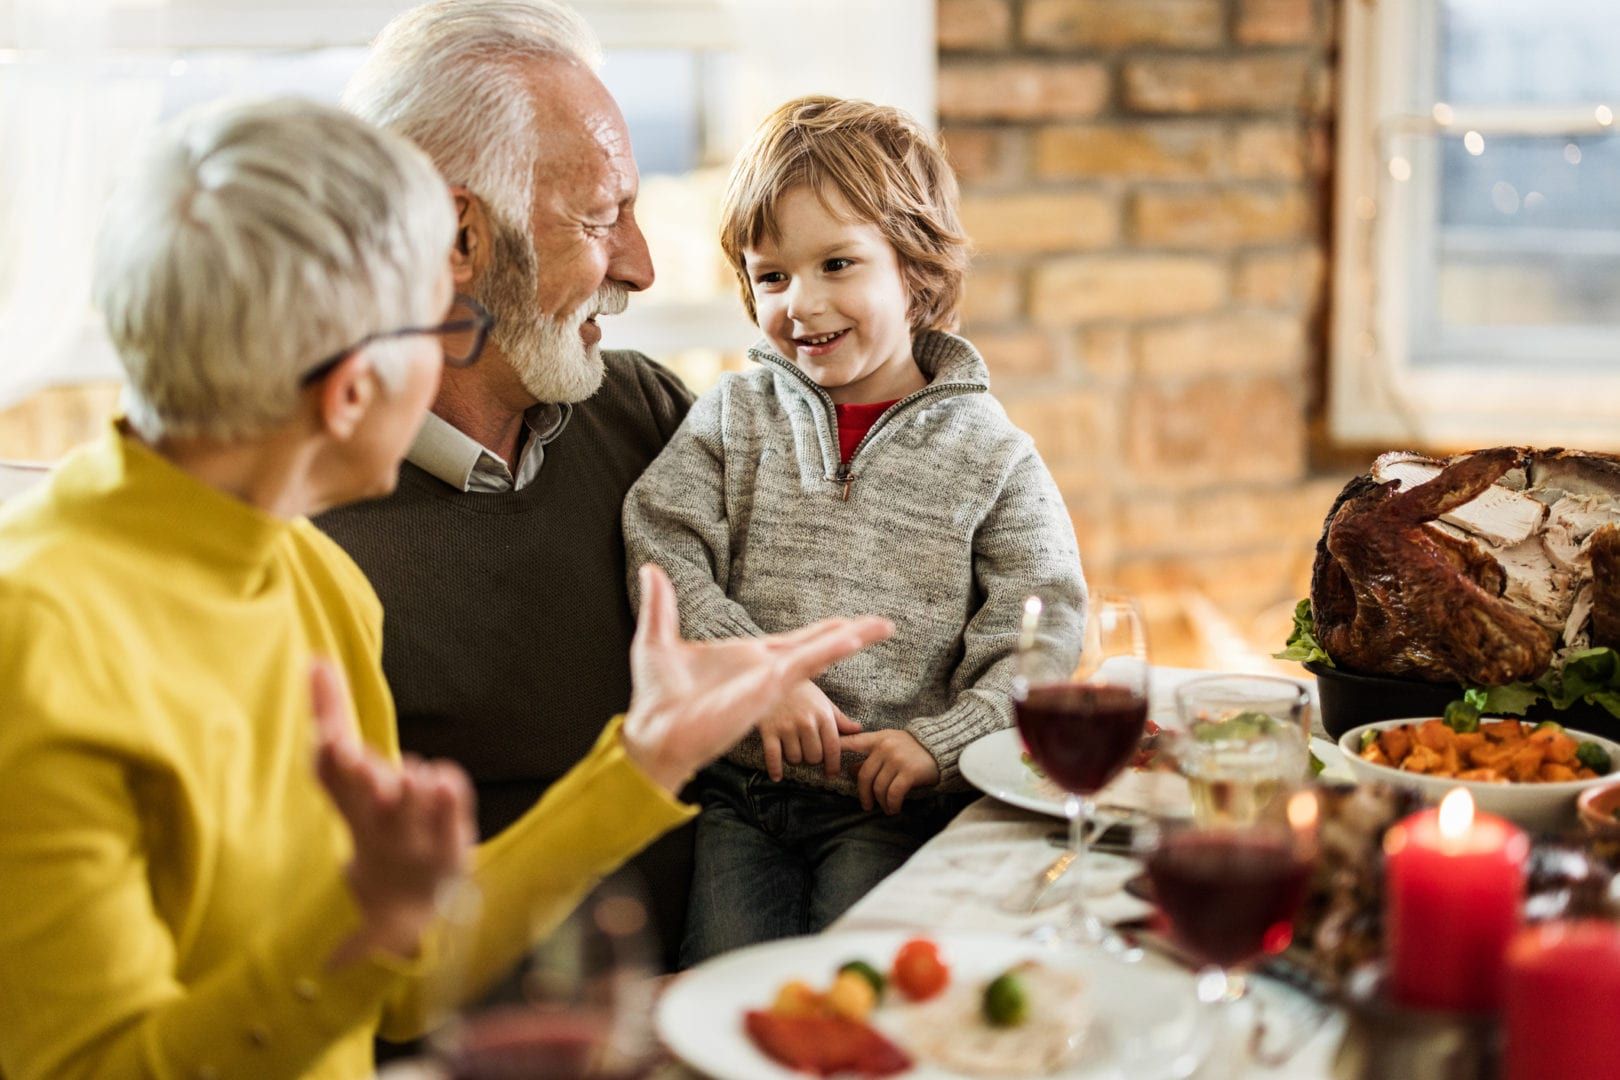 How to safely celebrate the holidays with older loved ones during COVID-19